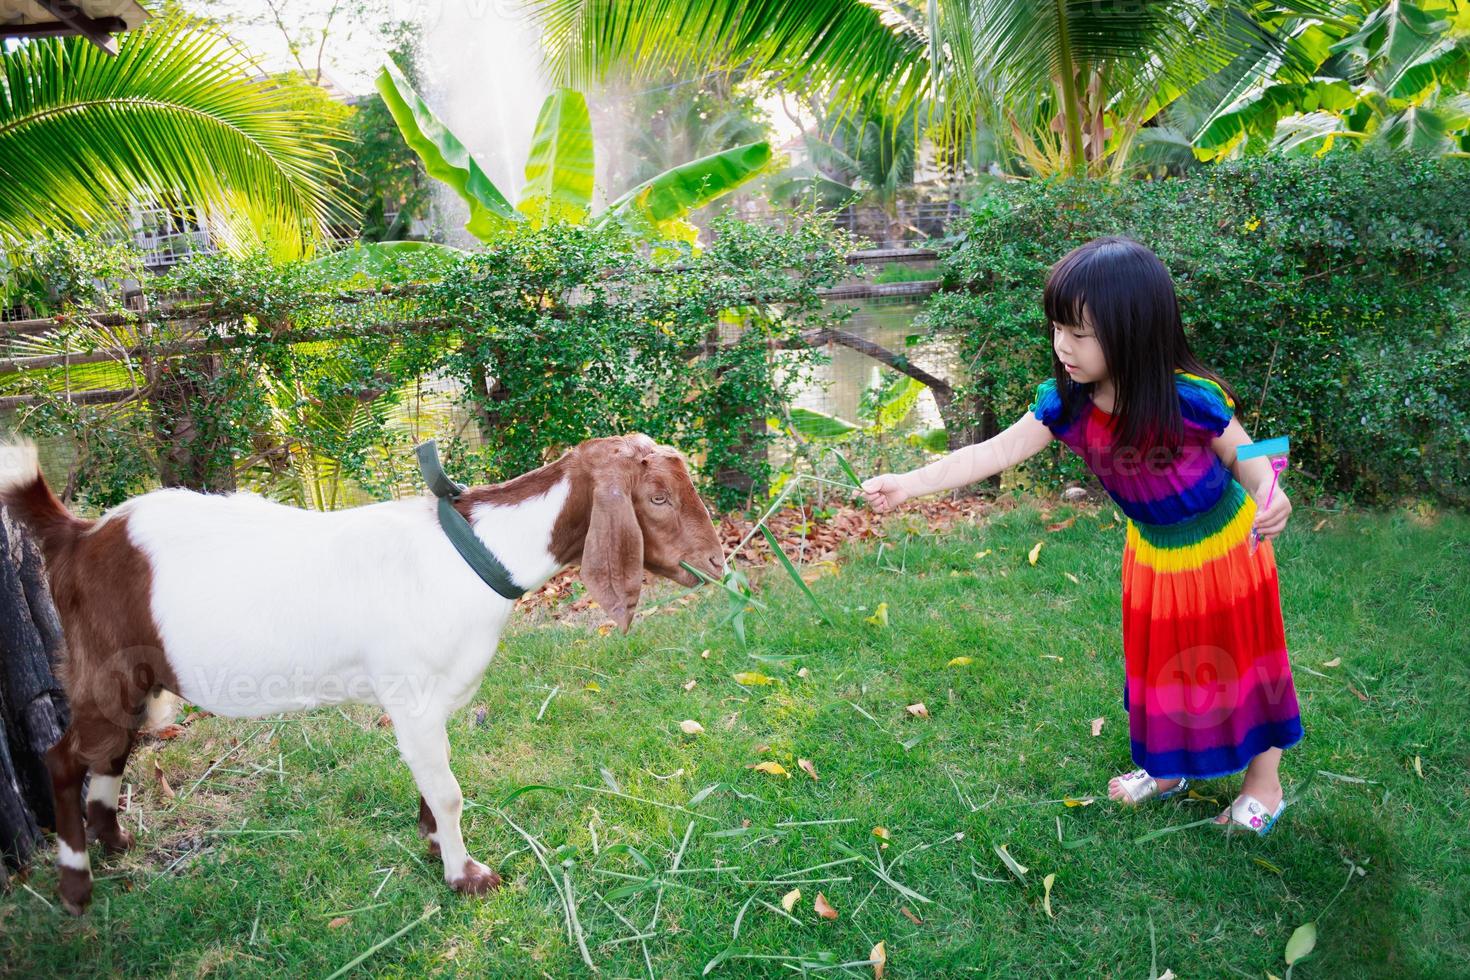 Cute Asian girl provides food for the animal. Child feed the grass for the goats. Children in colorful costumes do animal activities. On the green lawn. Kid is 4 years old. In summer or spring time. photo